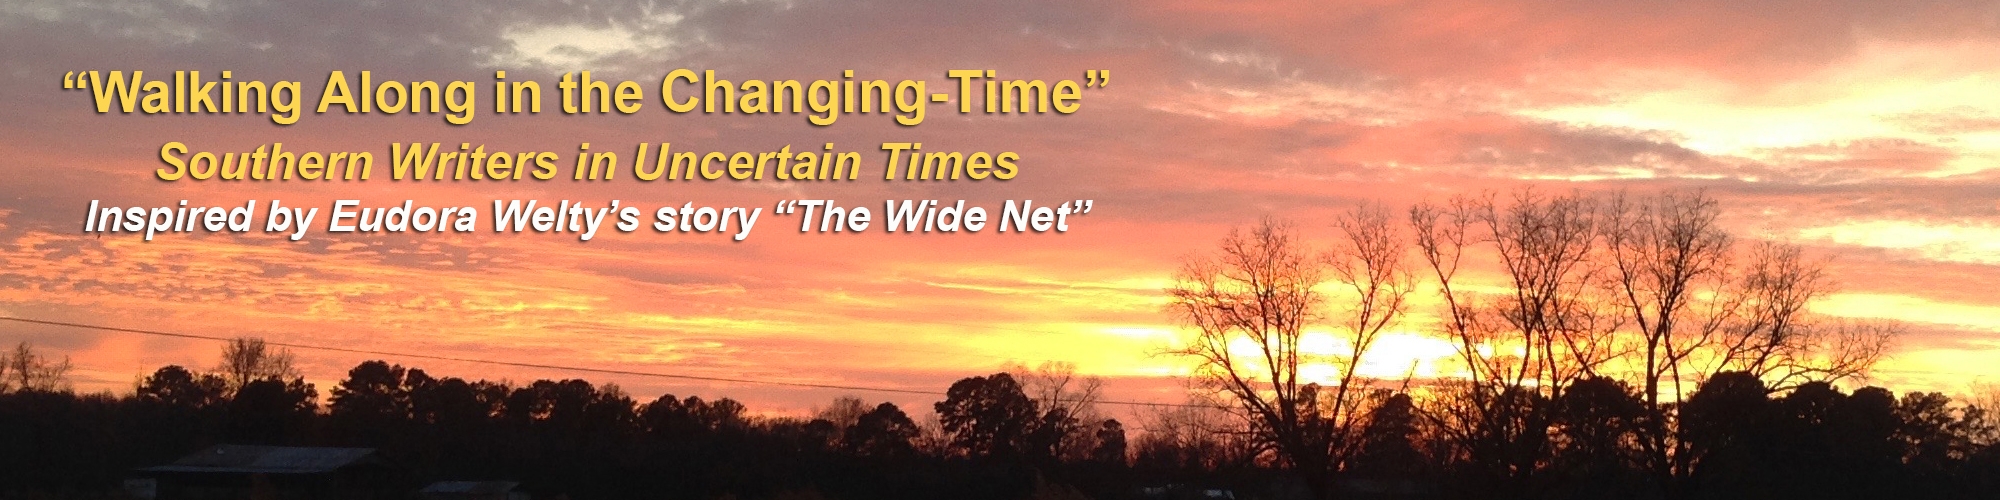 “'Walking Along in the Changing-Time': Southern Writers in Uncertain Times." inspired by Eudora Welty's story “The Wide Net.”